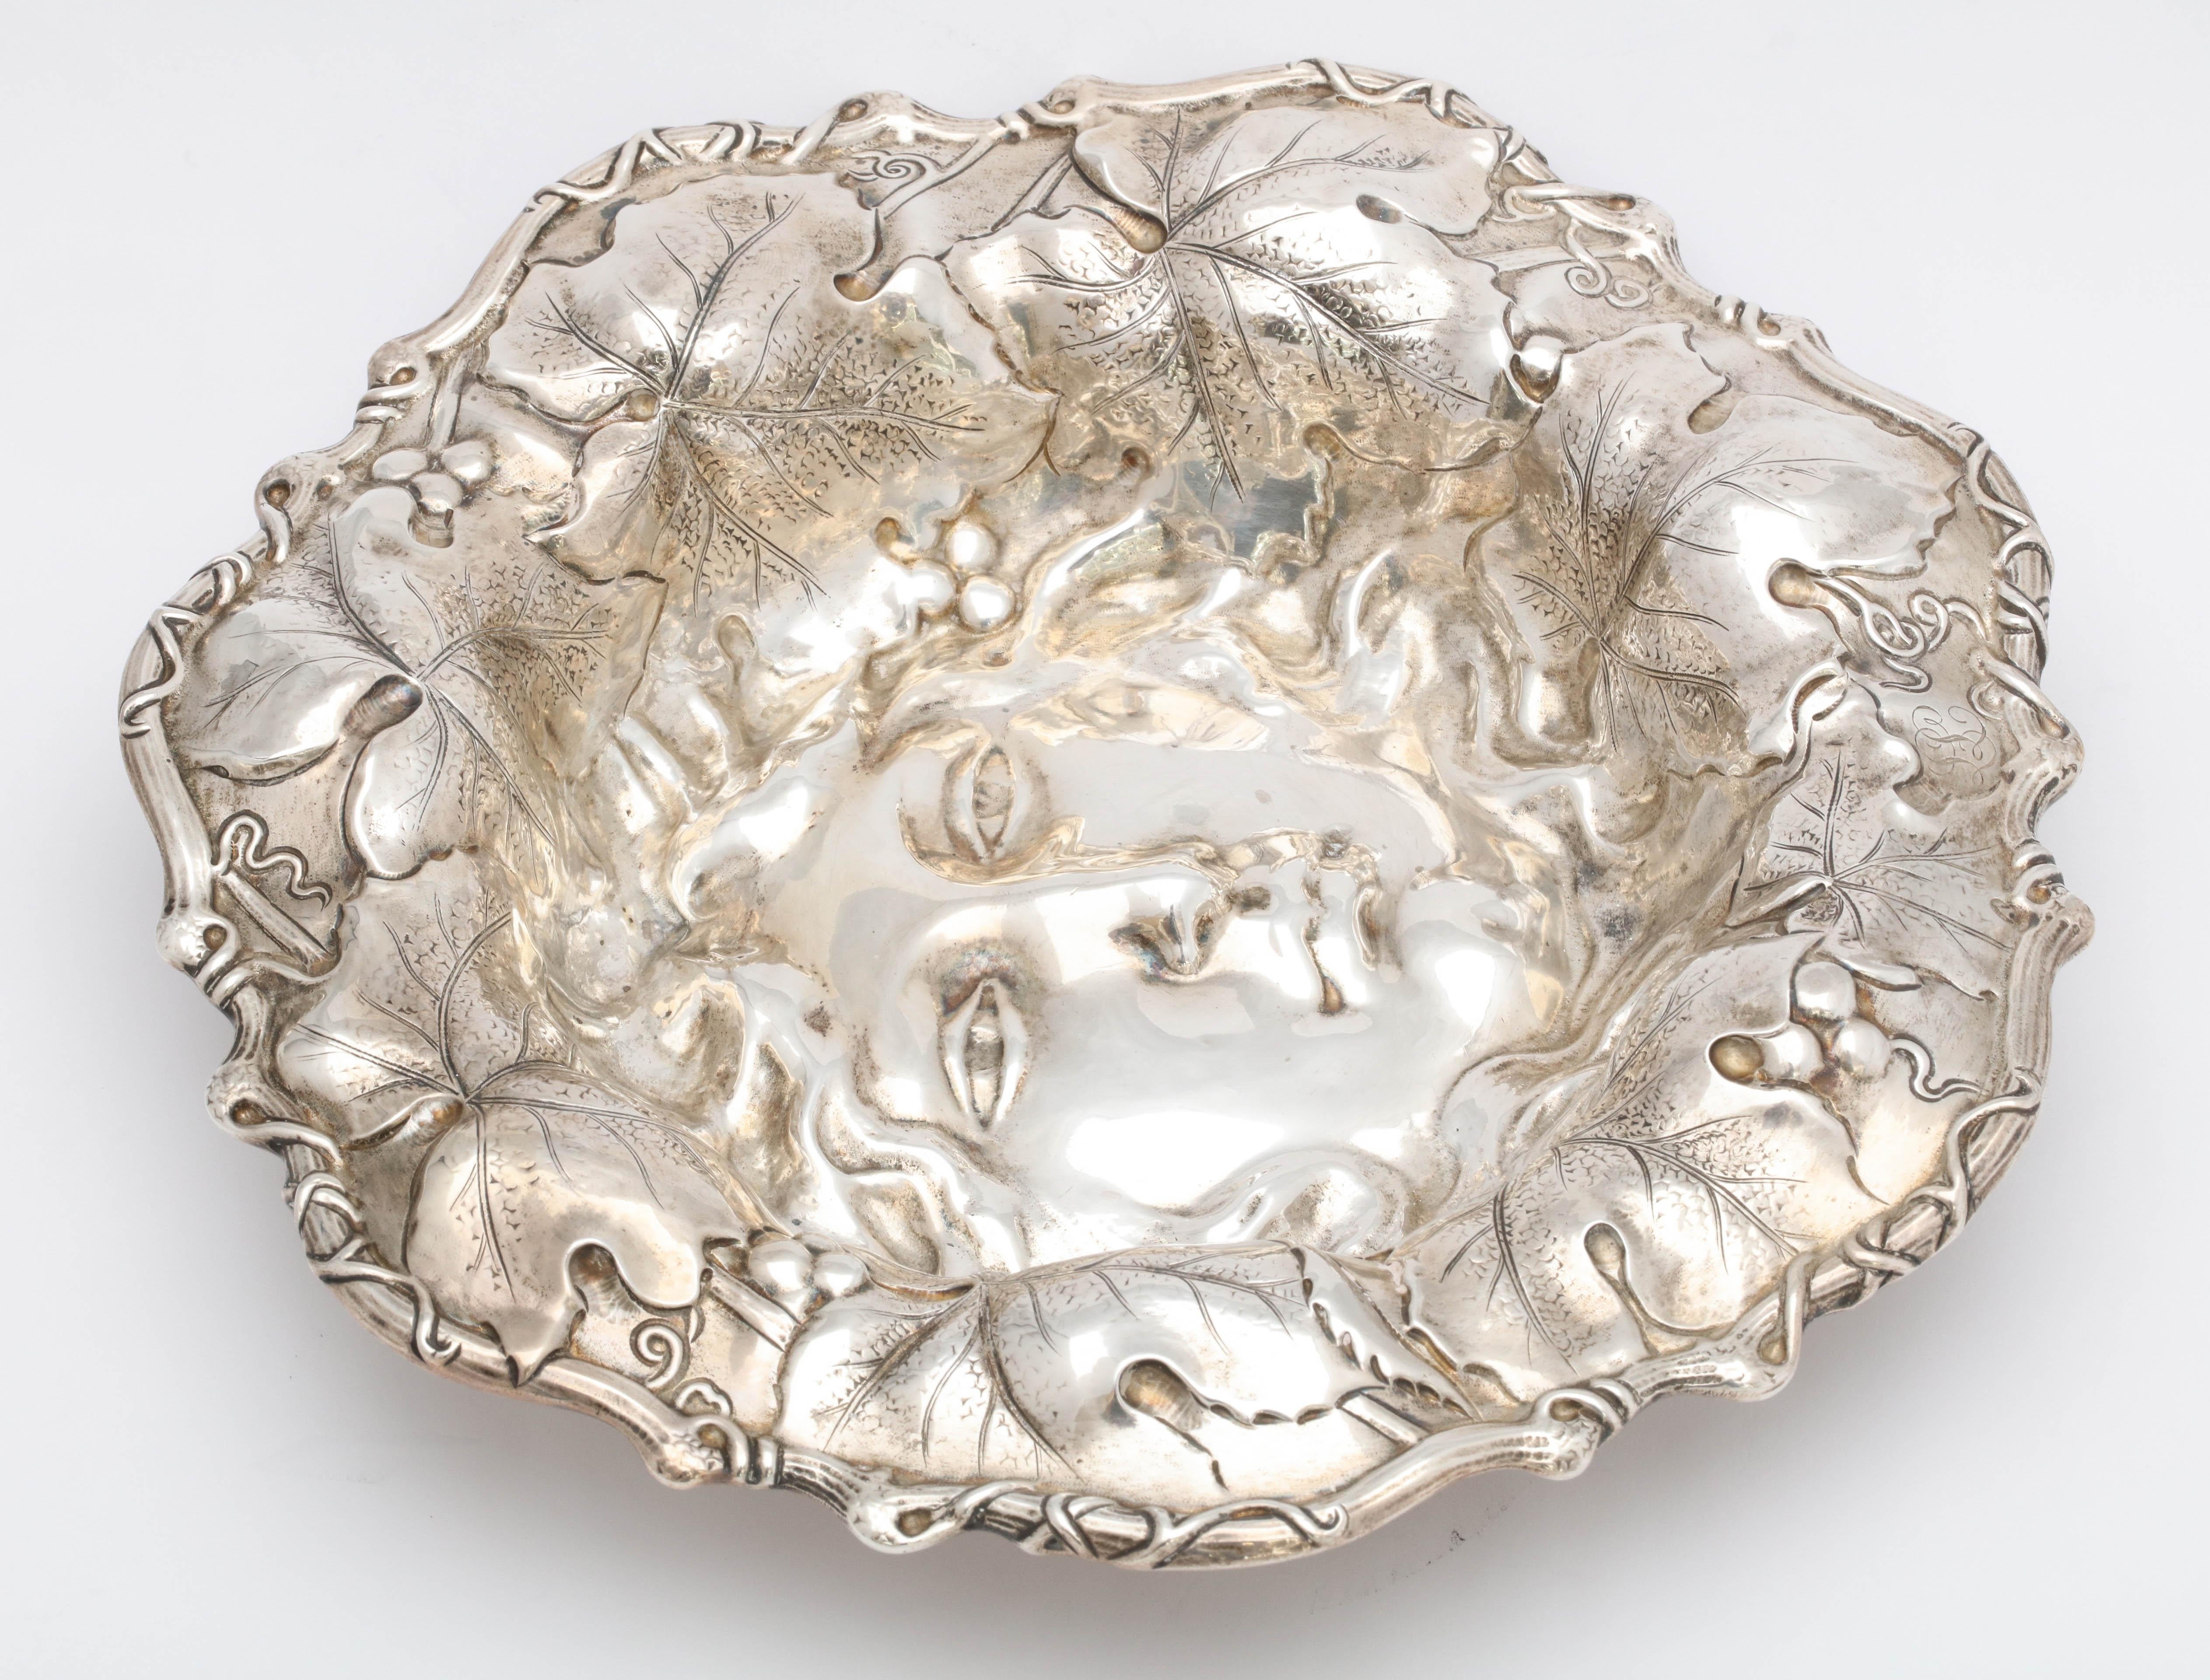 Art Nouveau Sterling Silver Bowl by Whiting Mfg. Co In Excellent Condition For Sale In New York, NY